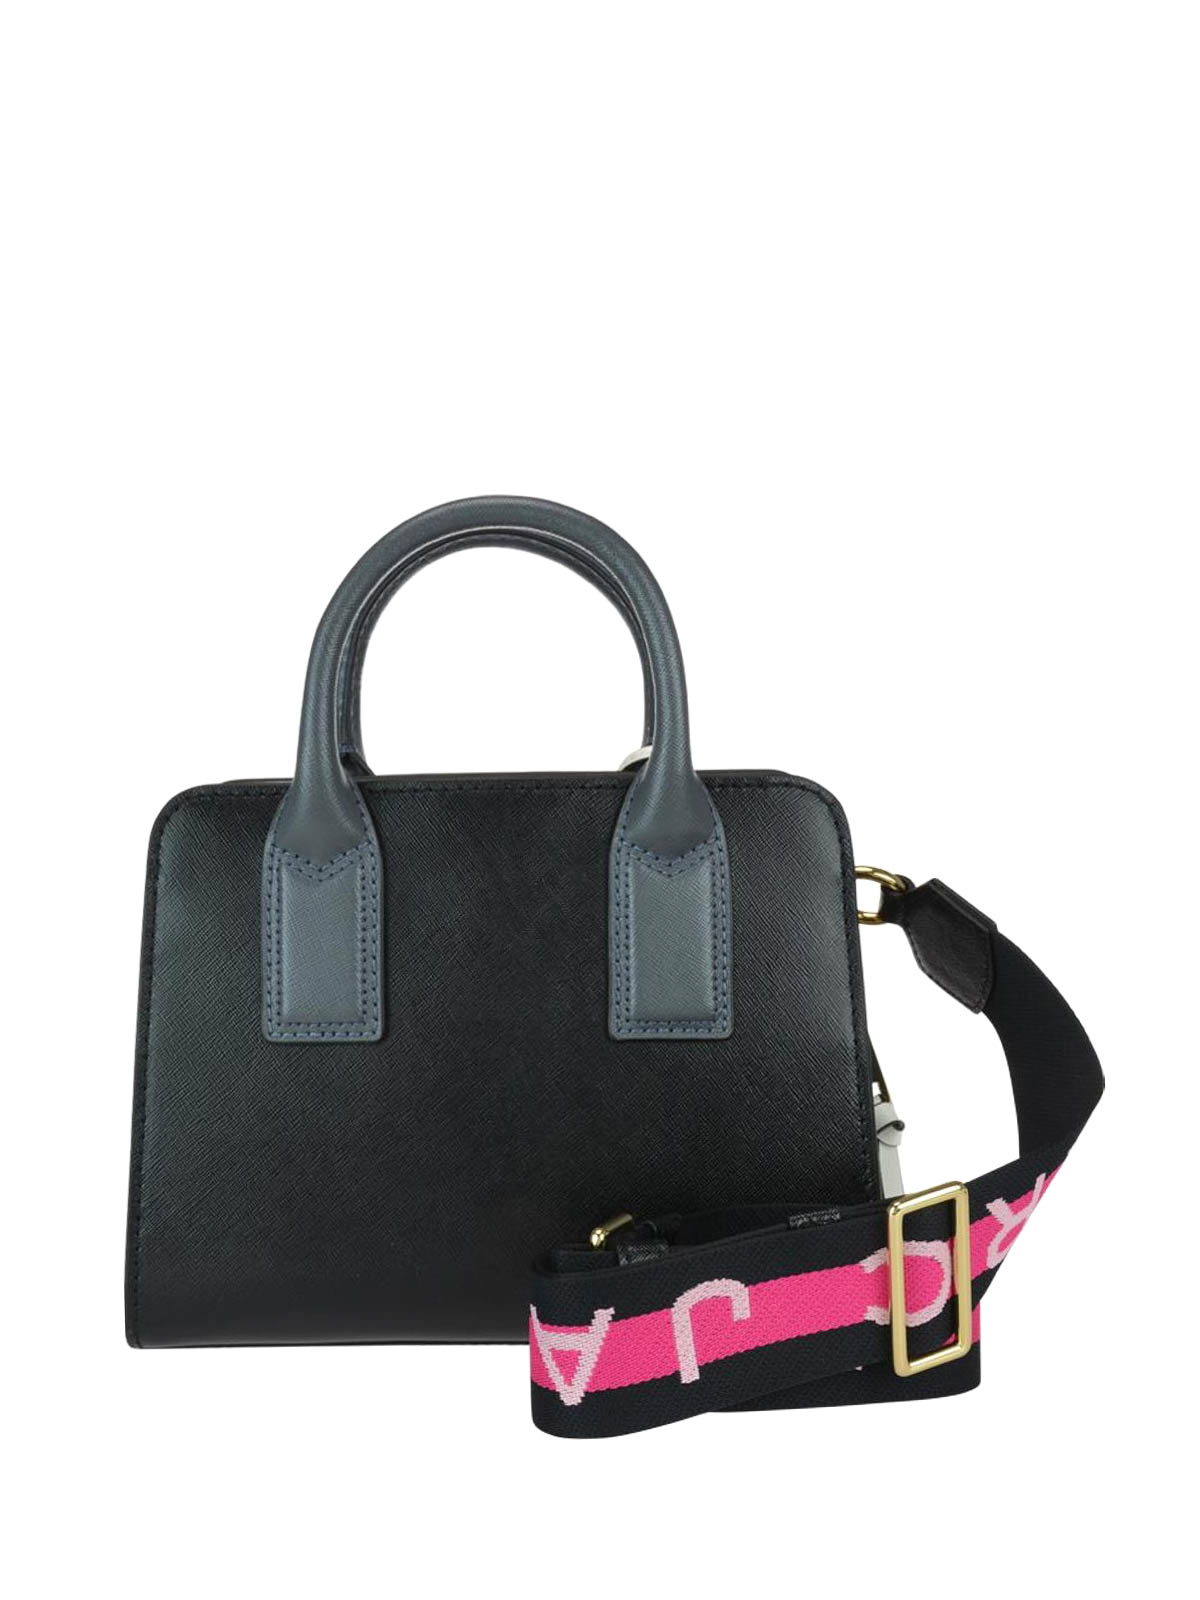 Totes bags Marc Jacobs - Little Big Shot black leather tote - M0013267014